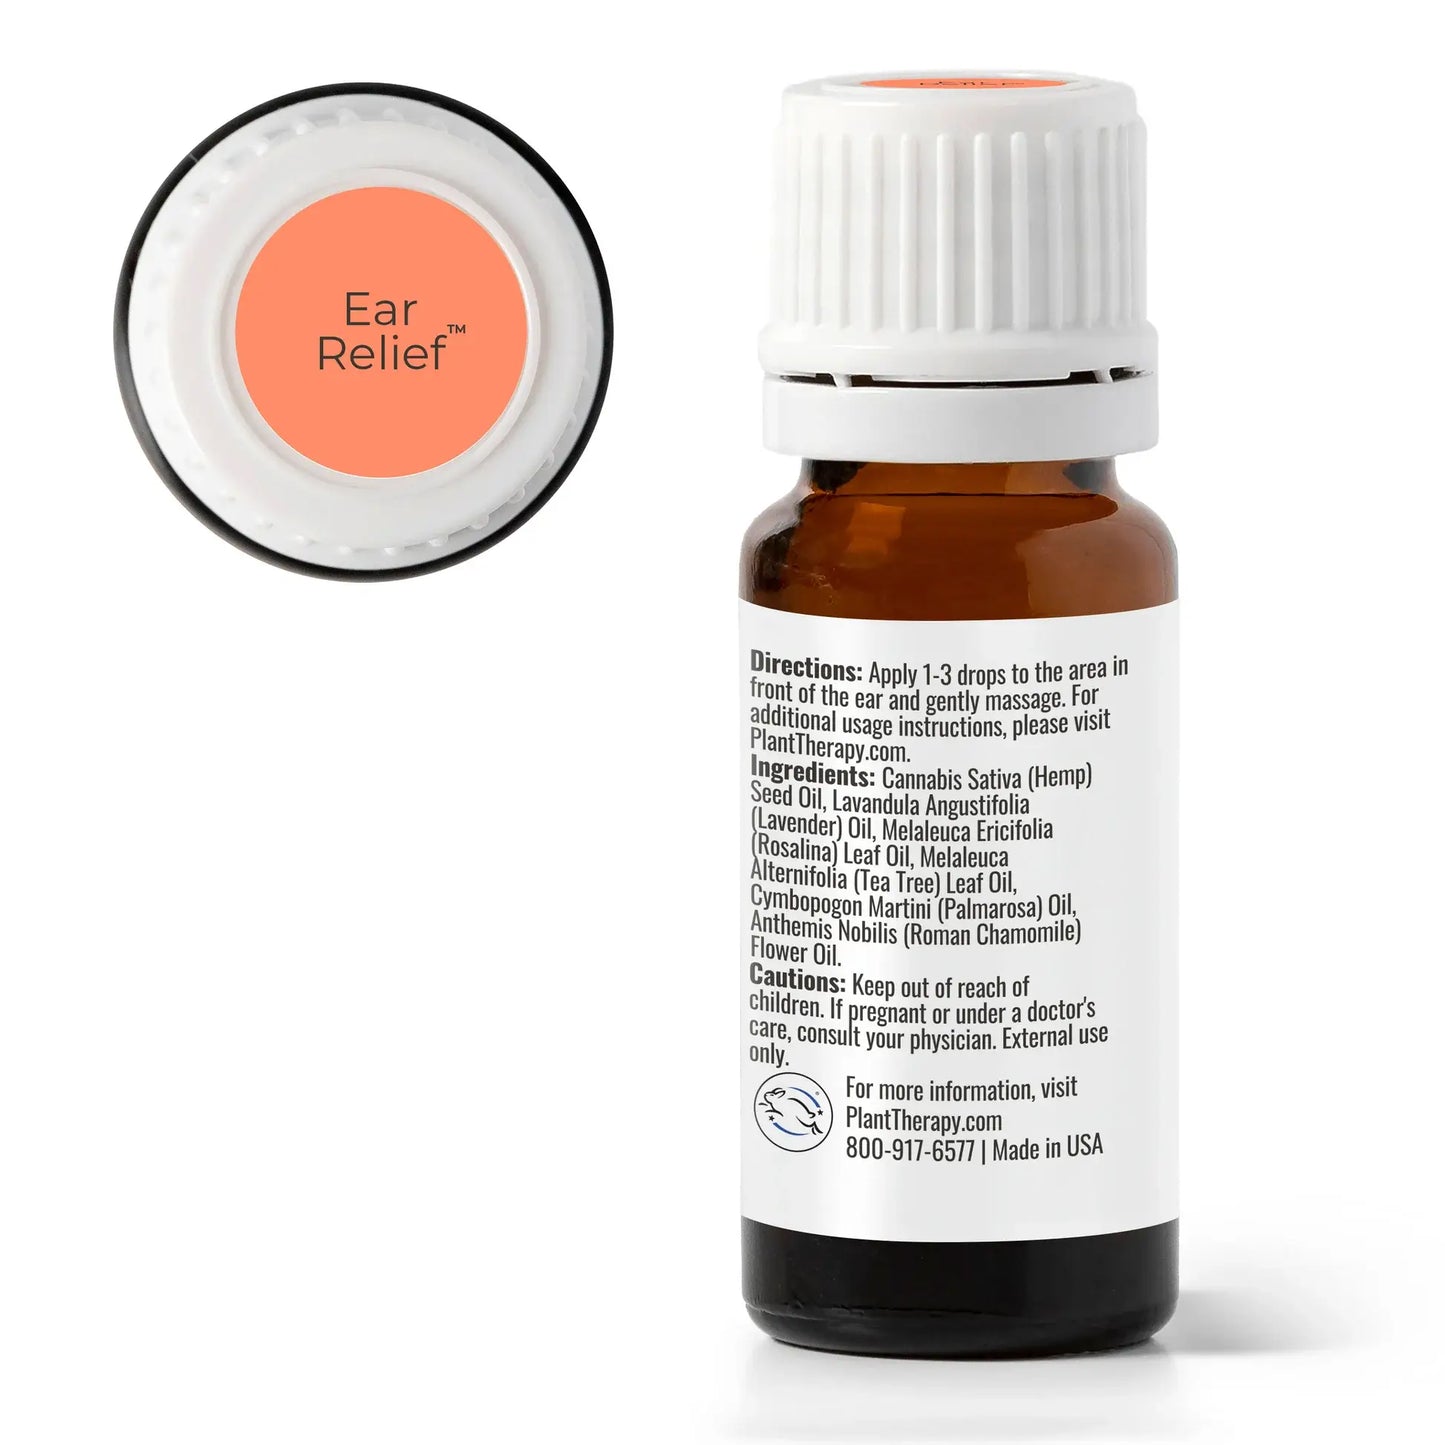 Plant Therapy - Ear Relief KidSafe Essential Oil 10 mL